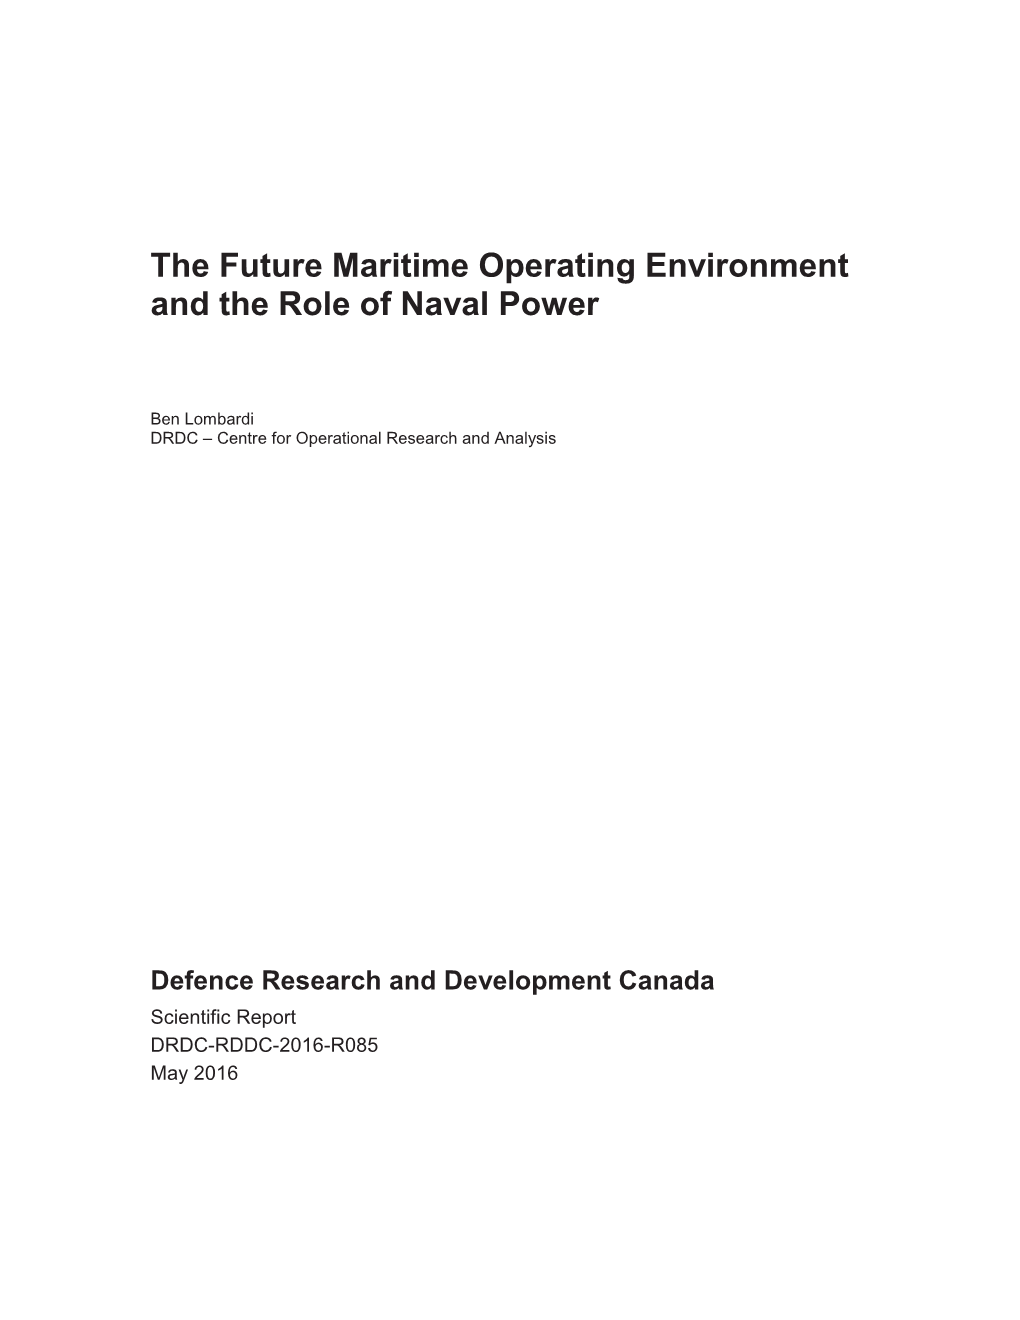 The Future Maritime Operating Environment and the Role of Naval Power